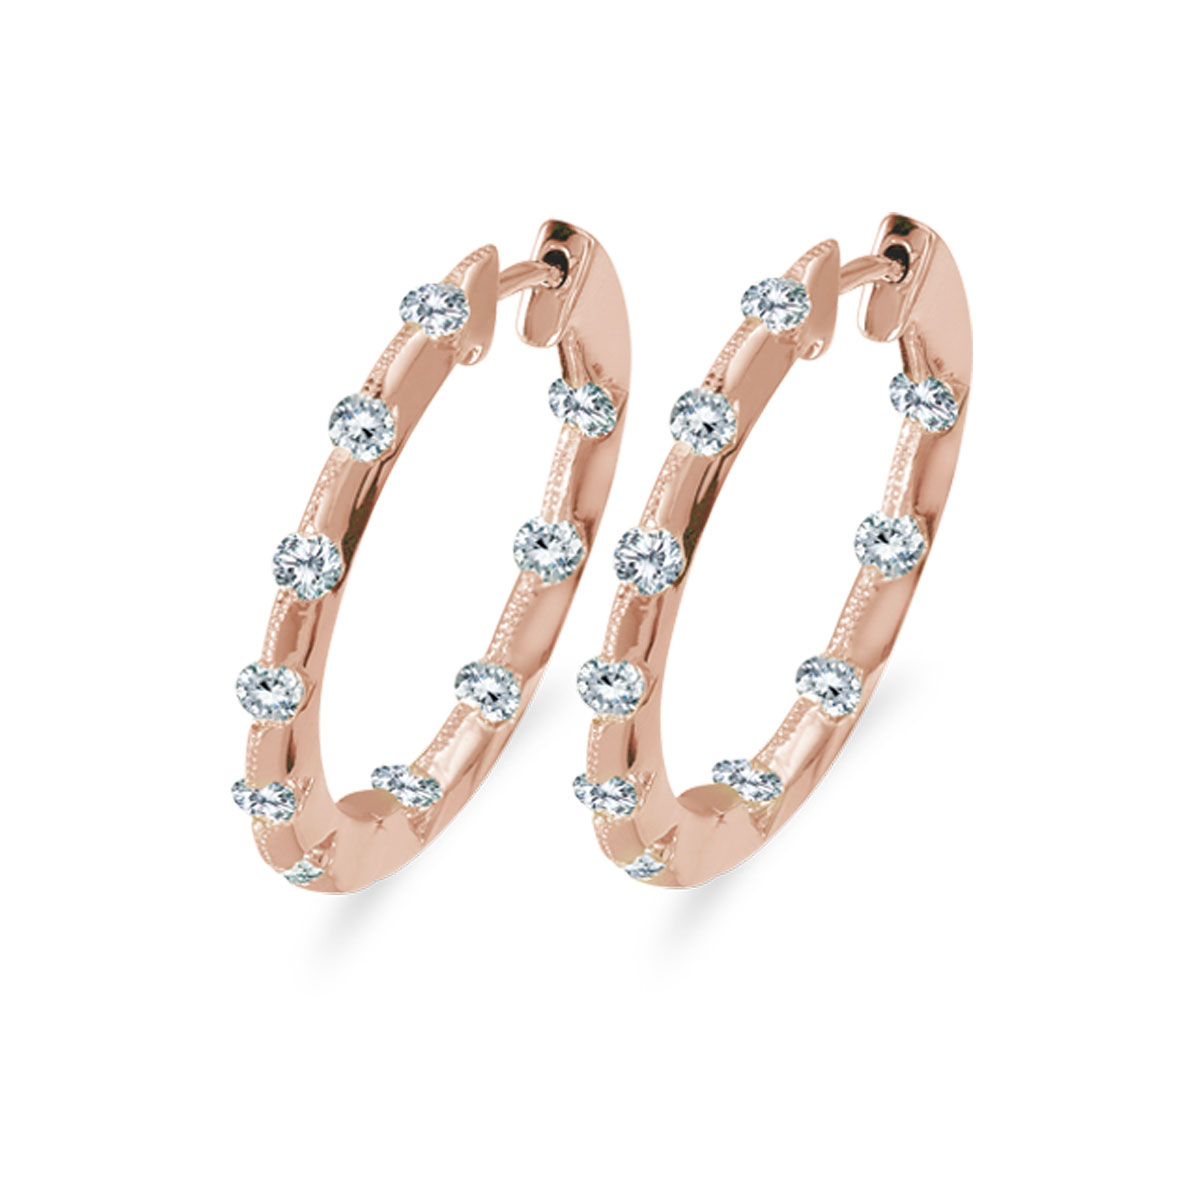 24 mm diamond inside/outside hoop earrings in beautiful 14k rose gold. The perfect look for day o...